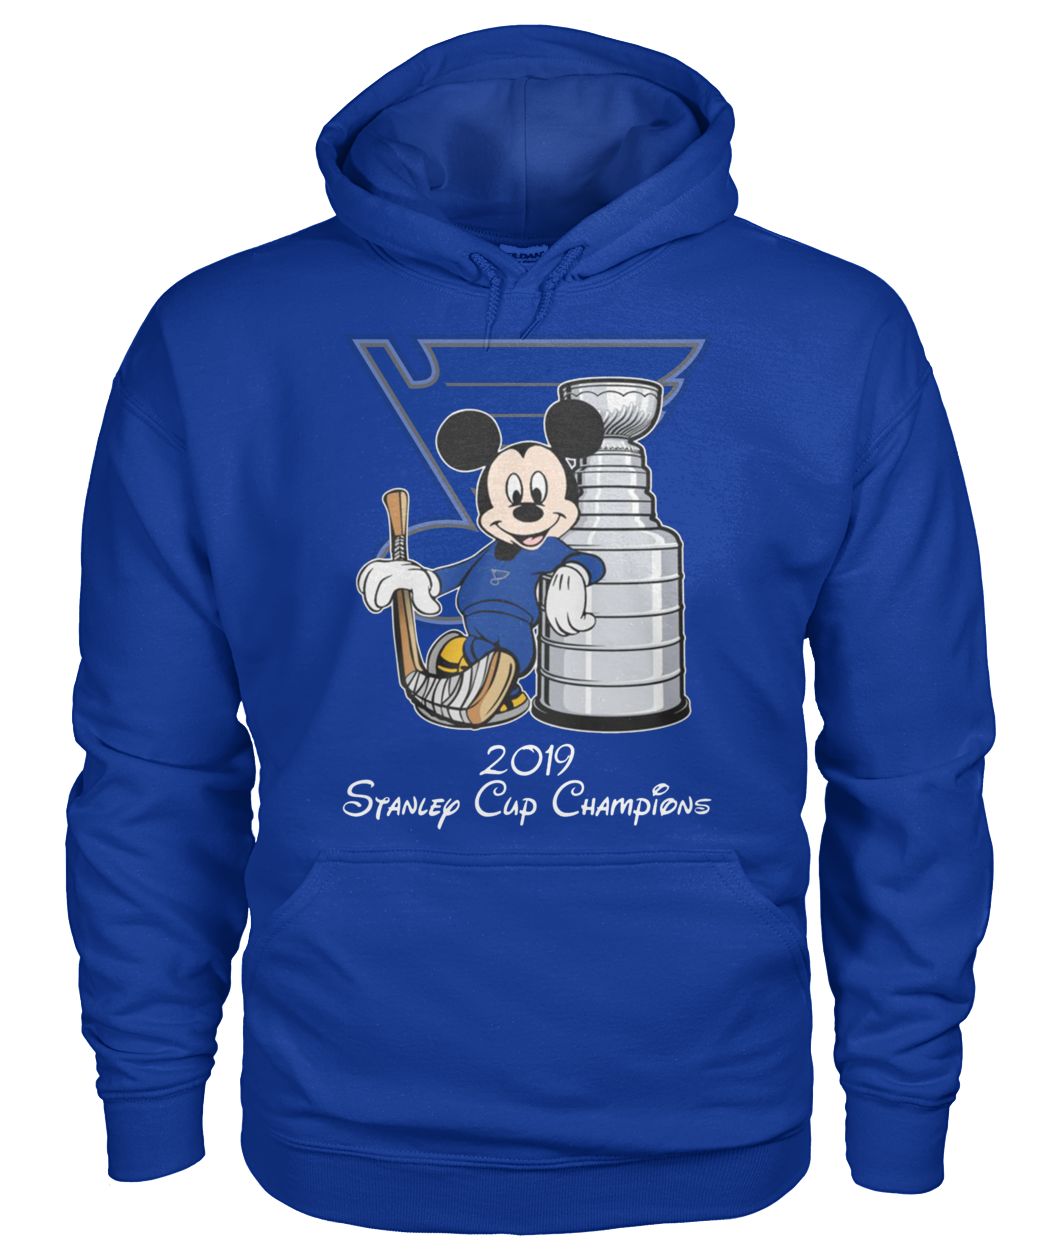 Mickey mouse st louis blues 2019 Stanley cup champions gildan hoodie